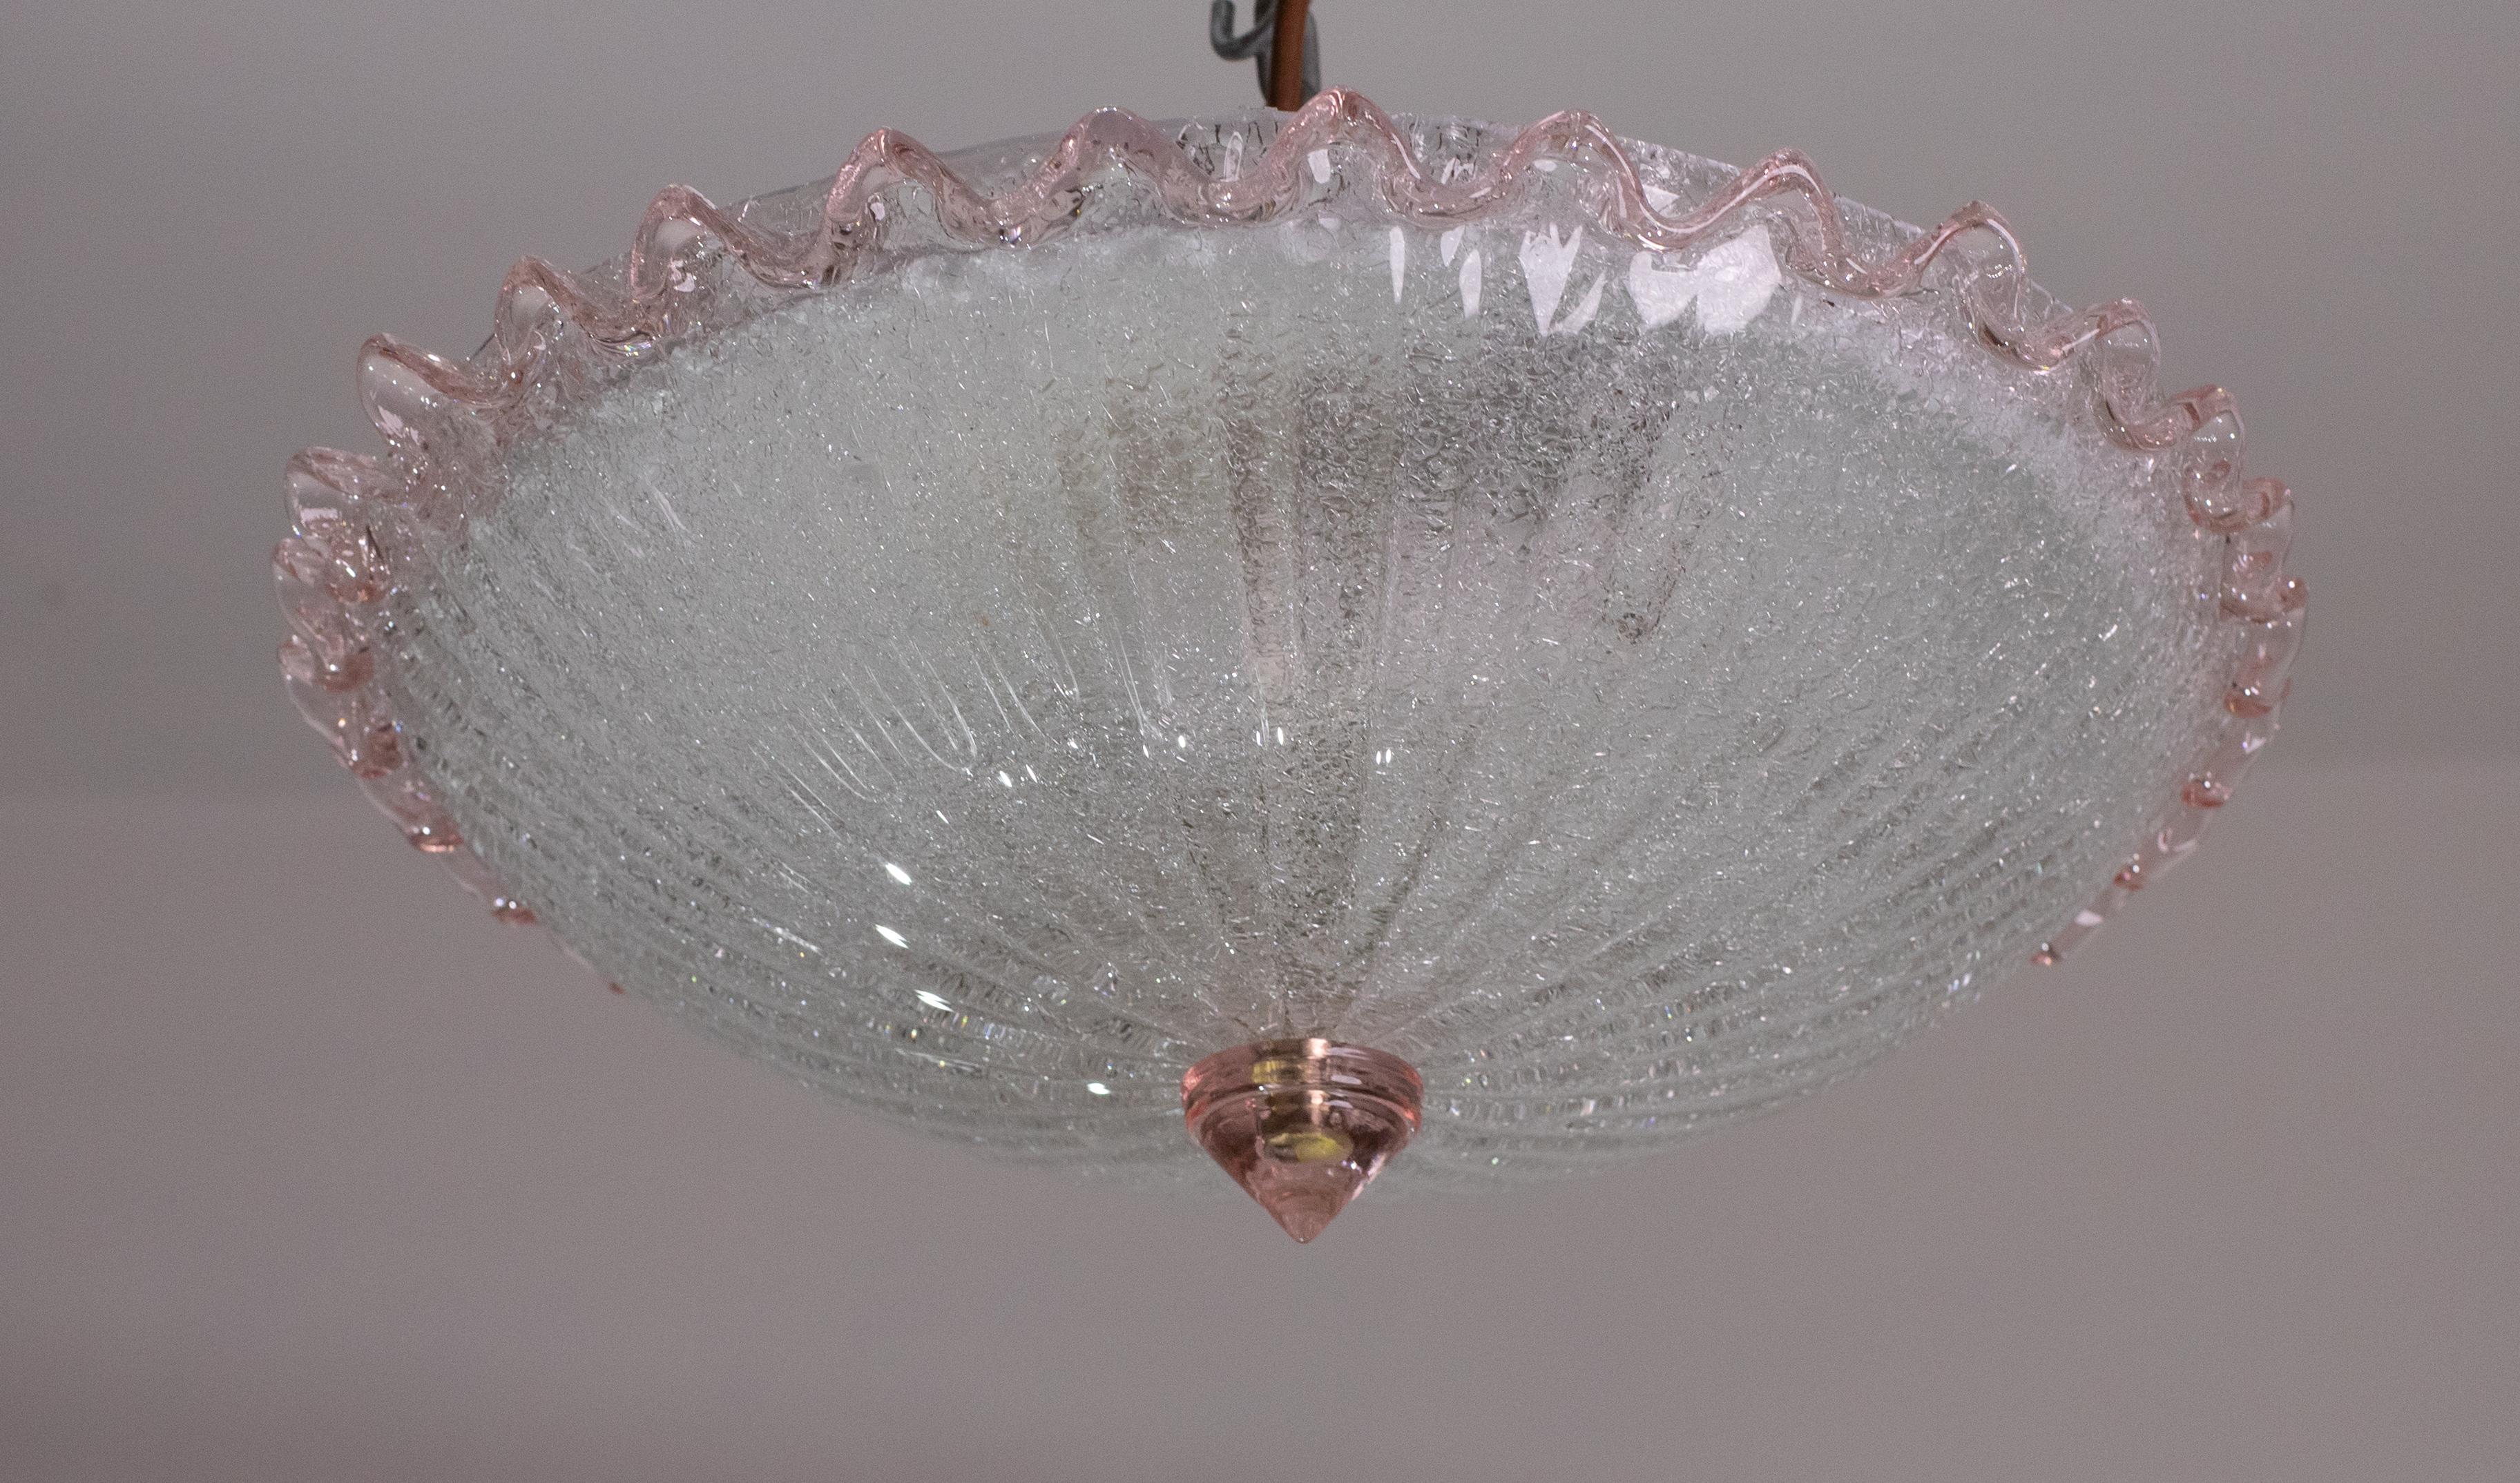 Stunning set of 3 pink and transparent/silver Murano ceiling light.
The ceiling light consists of two glass elements, the central plate plus the pink low element.
The central plate is surrounded by a wavy pink stripe typical of Venetian\Murano